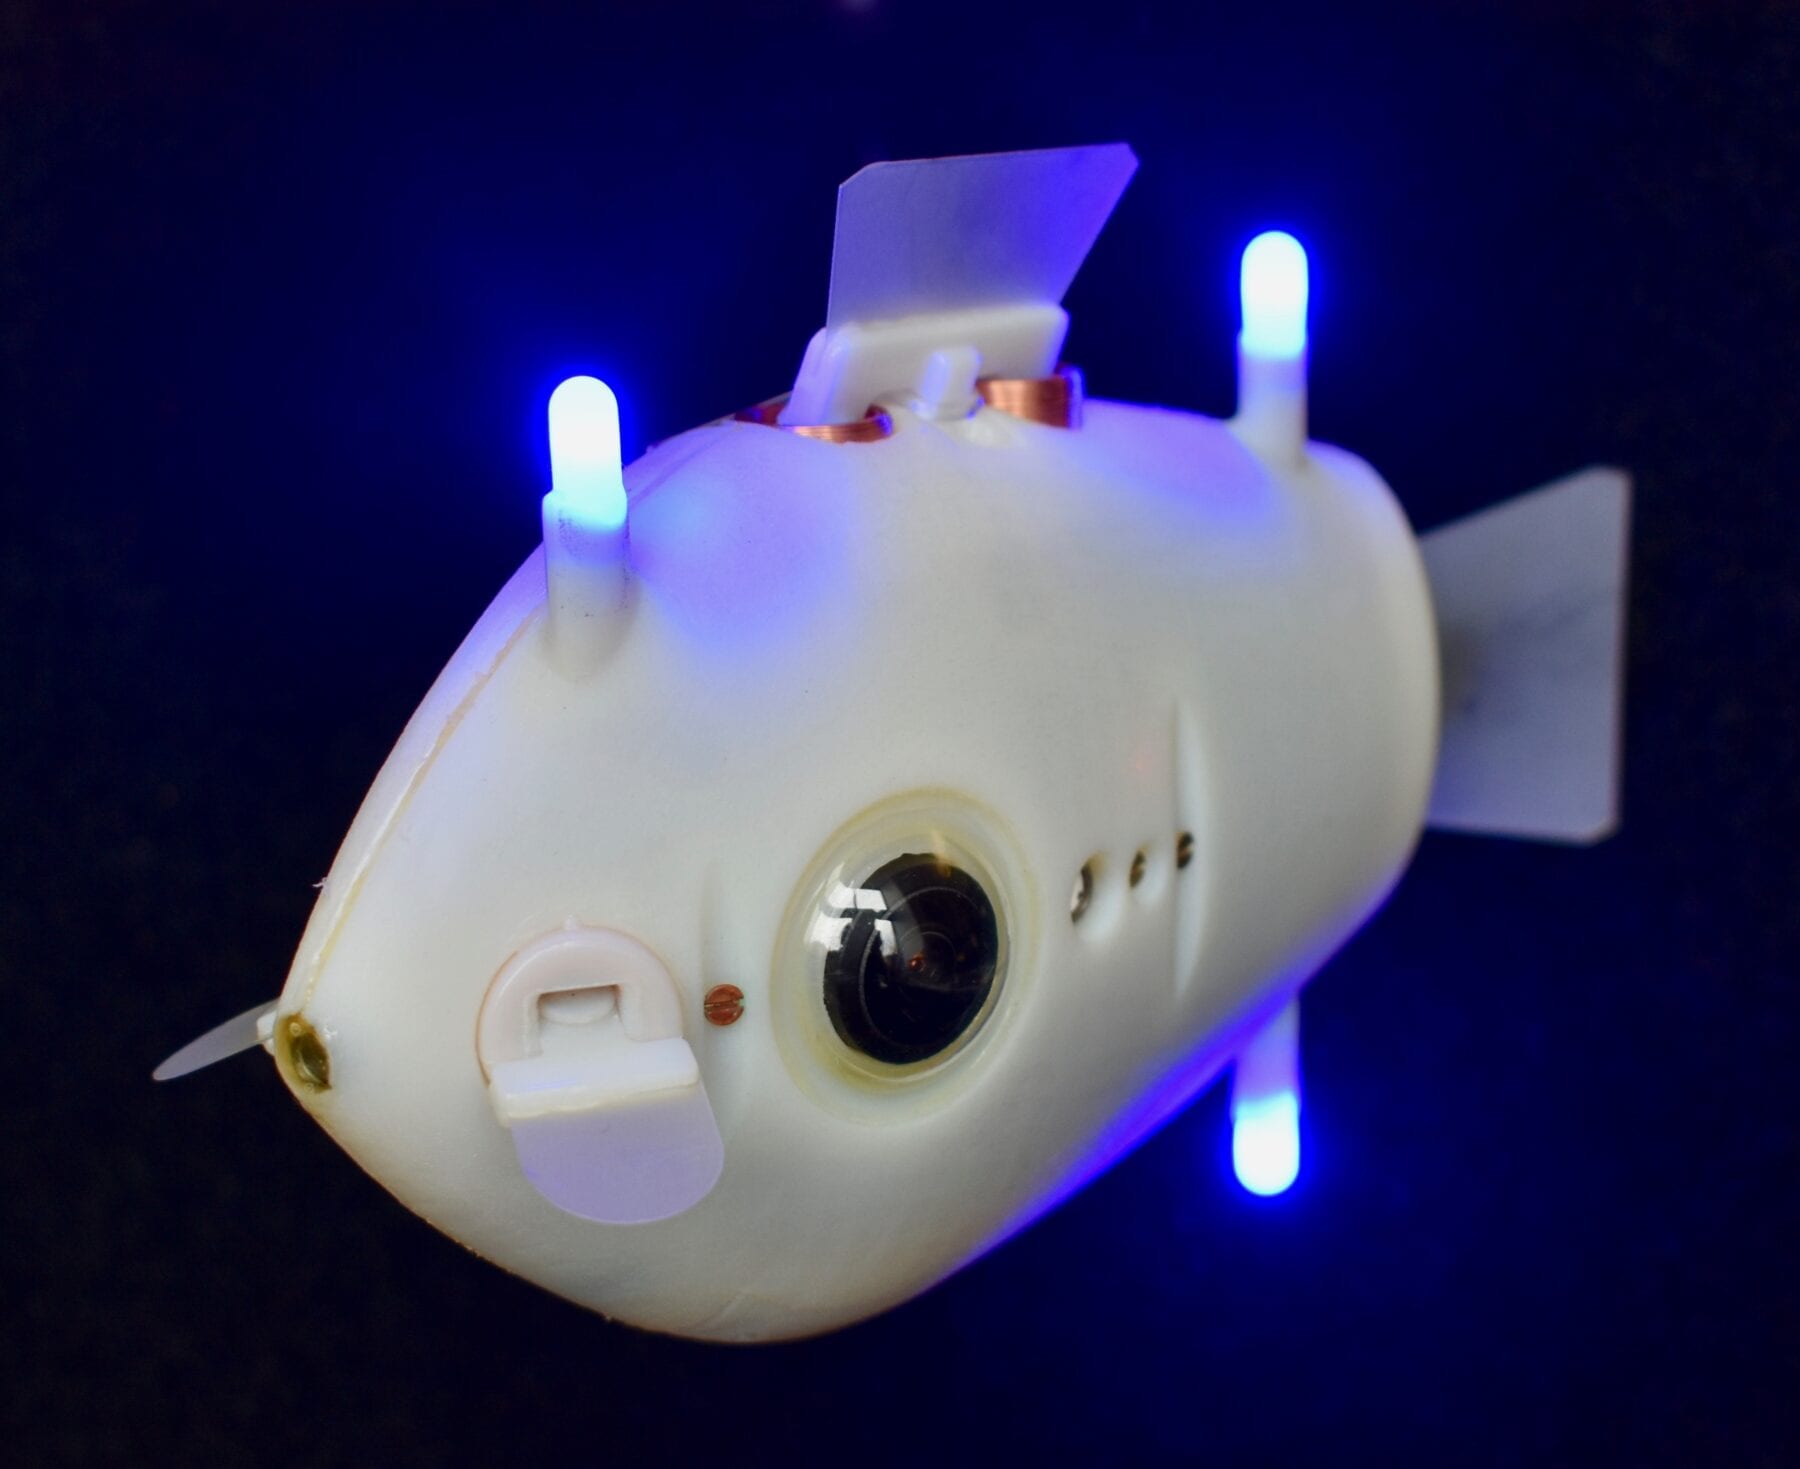 These fish-inspired robots can synchronize their movements without any outside control. Based on the simple production and detection of LED light, the robotic collective exhibits complex self-organized behaviors, including aggregation, dispersion and circle formation. (Image courtesy of Self-organizing Systems Research Group)